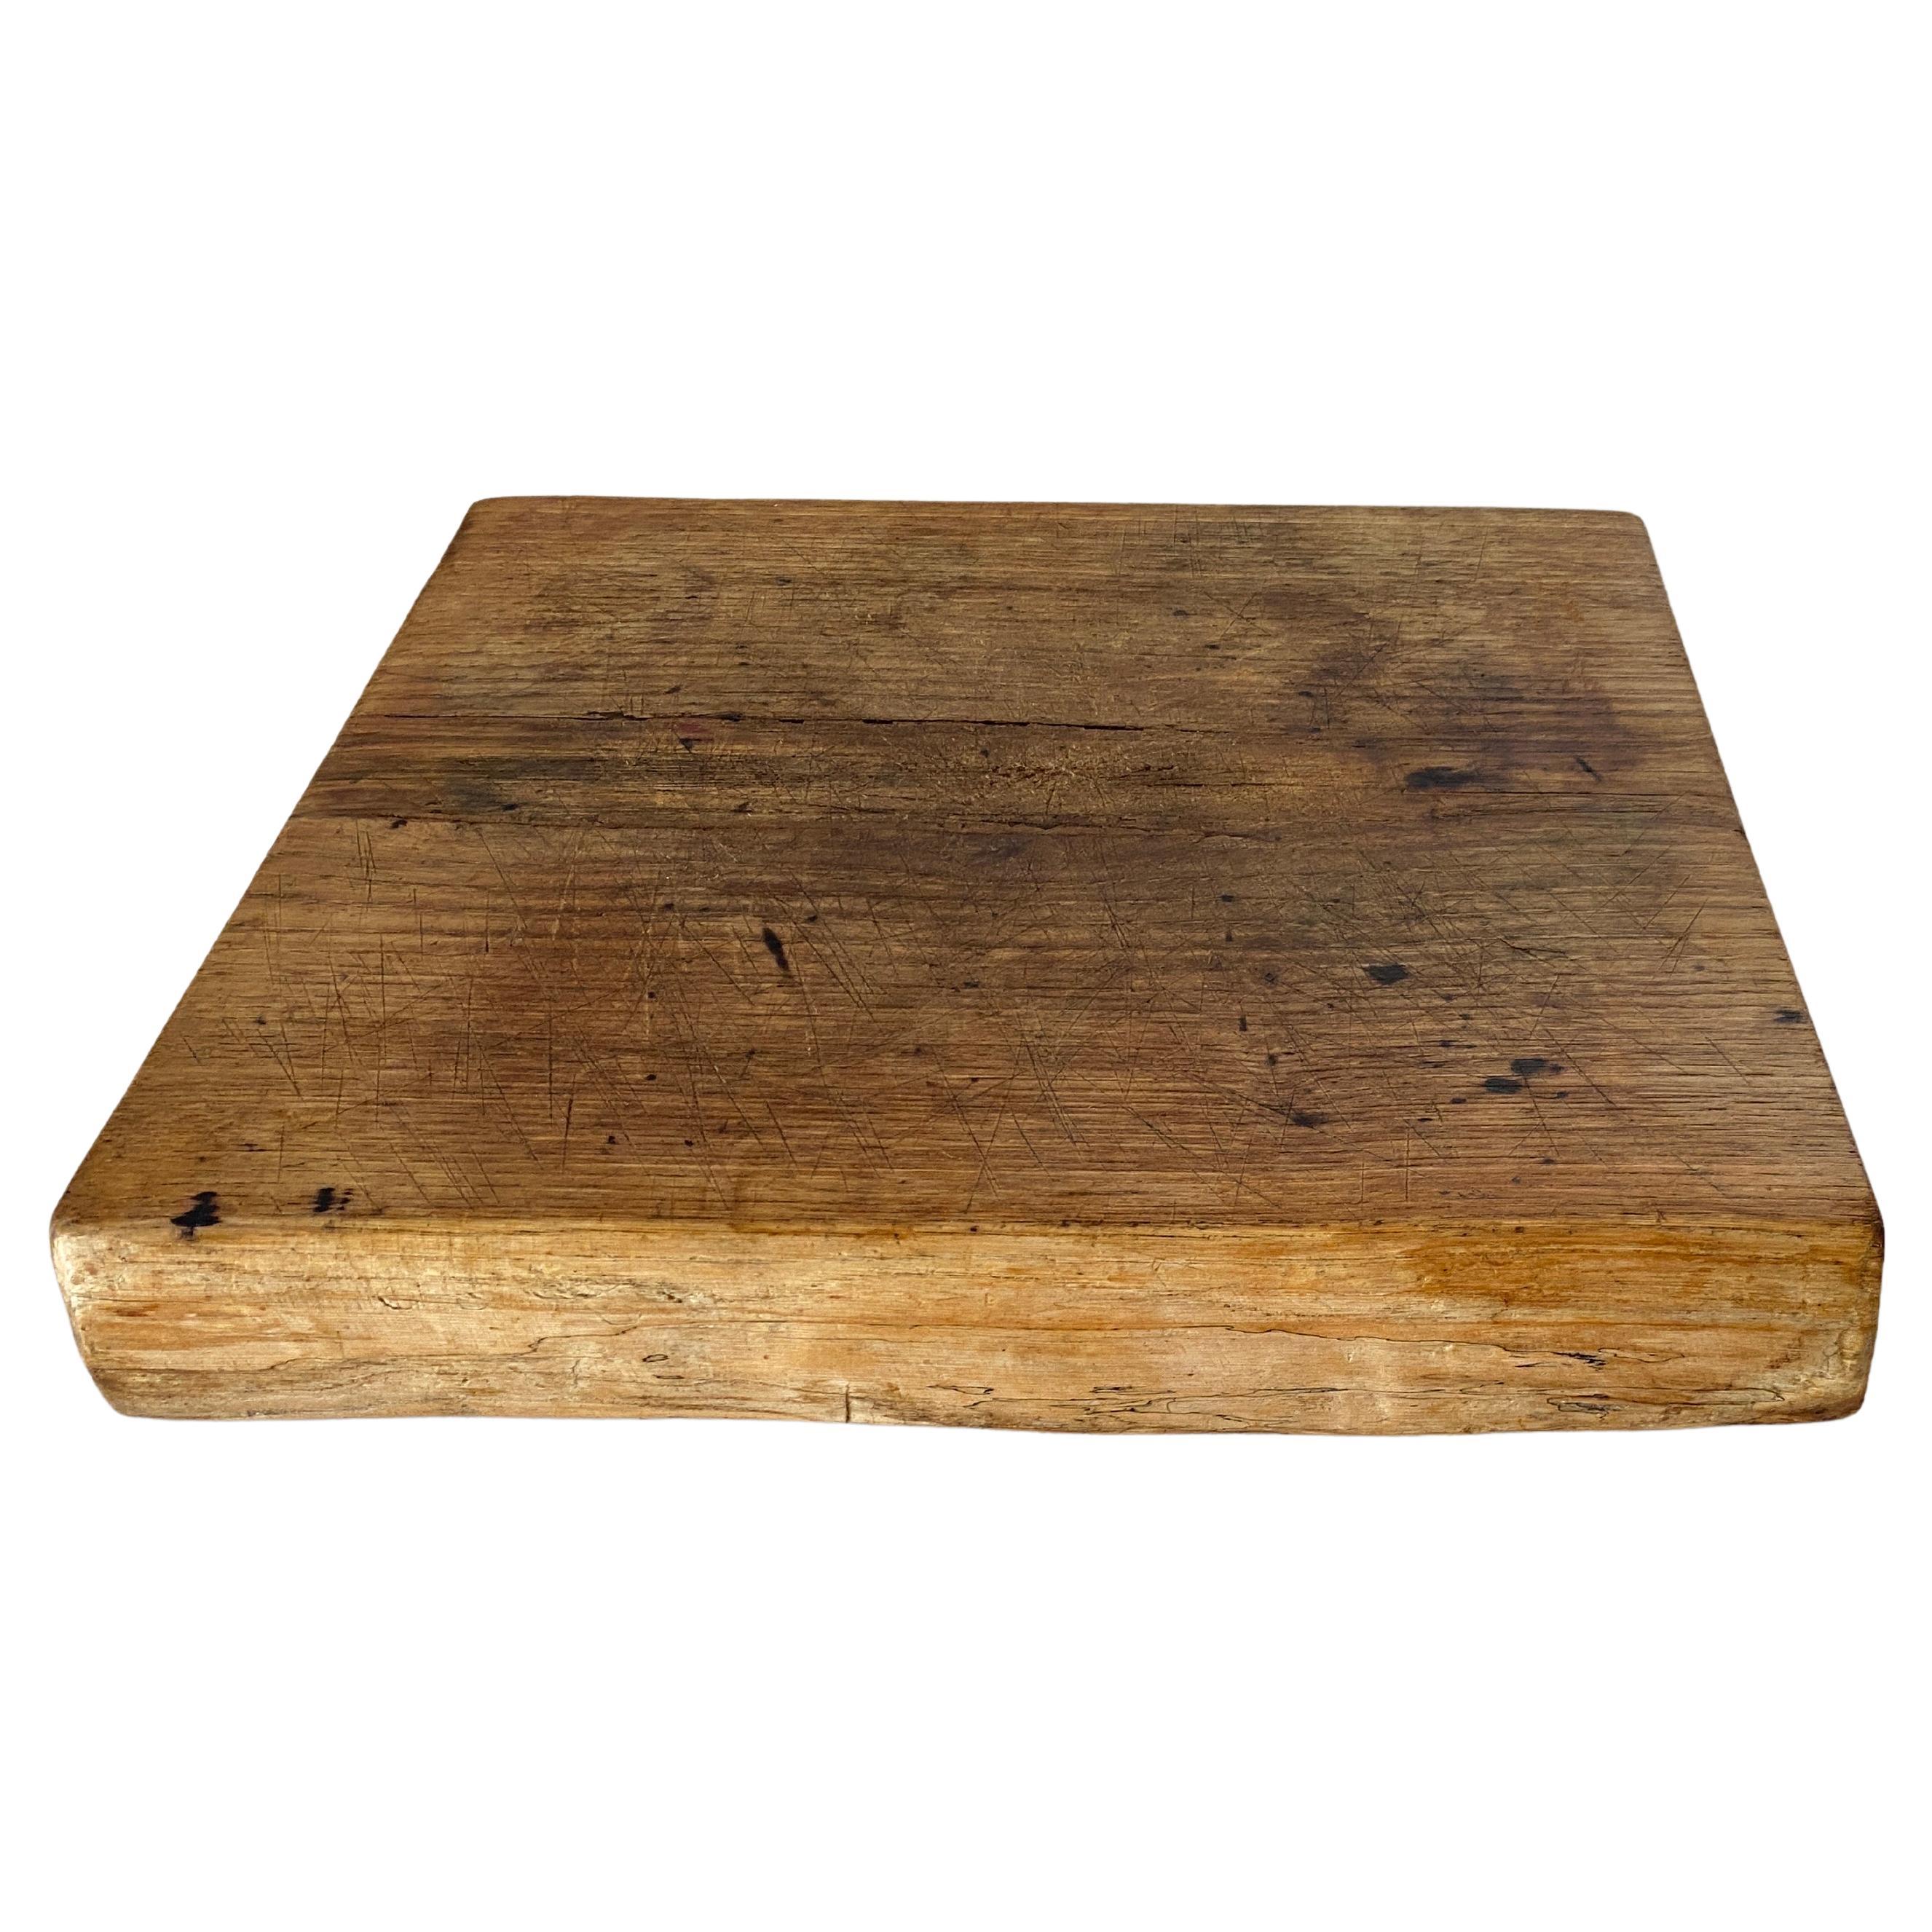 Large Wooden Chopping or Cutting Board Old Patina, Brown Color France 20th 